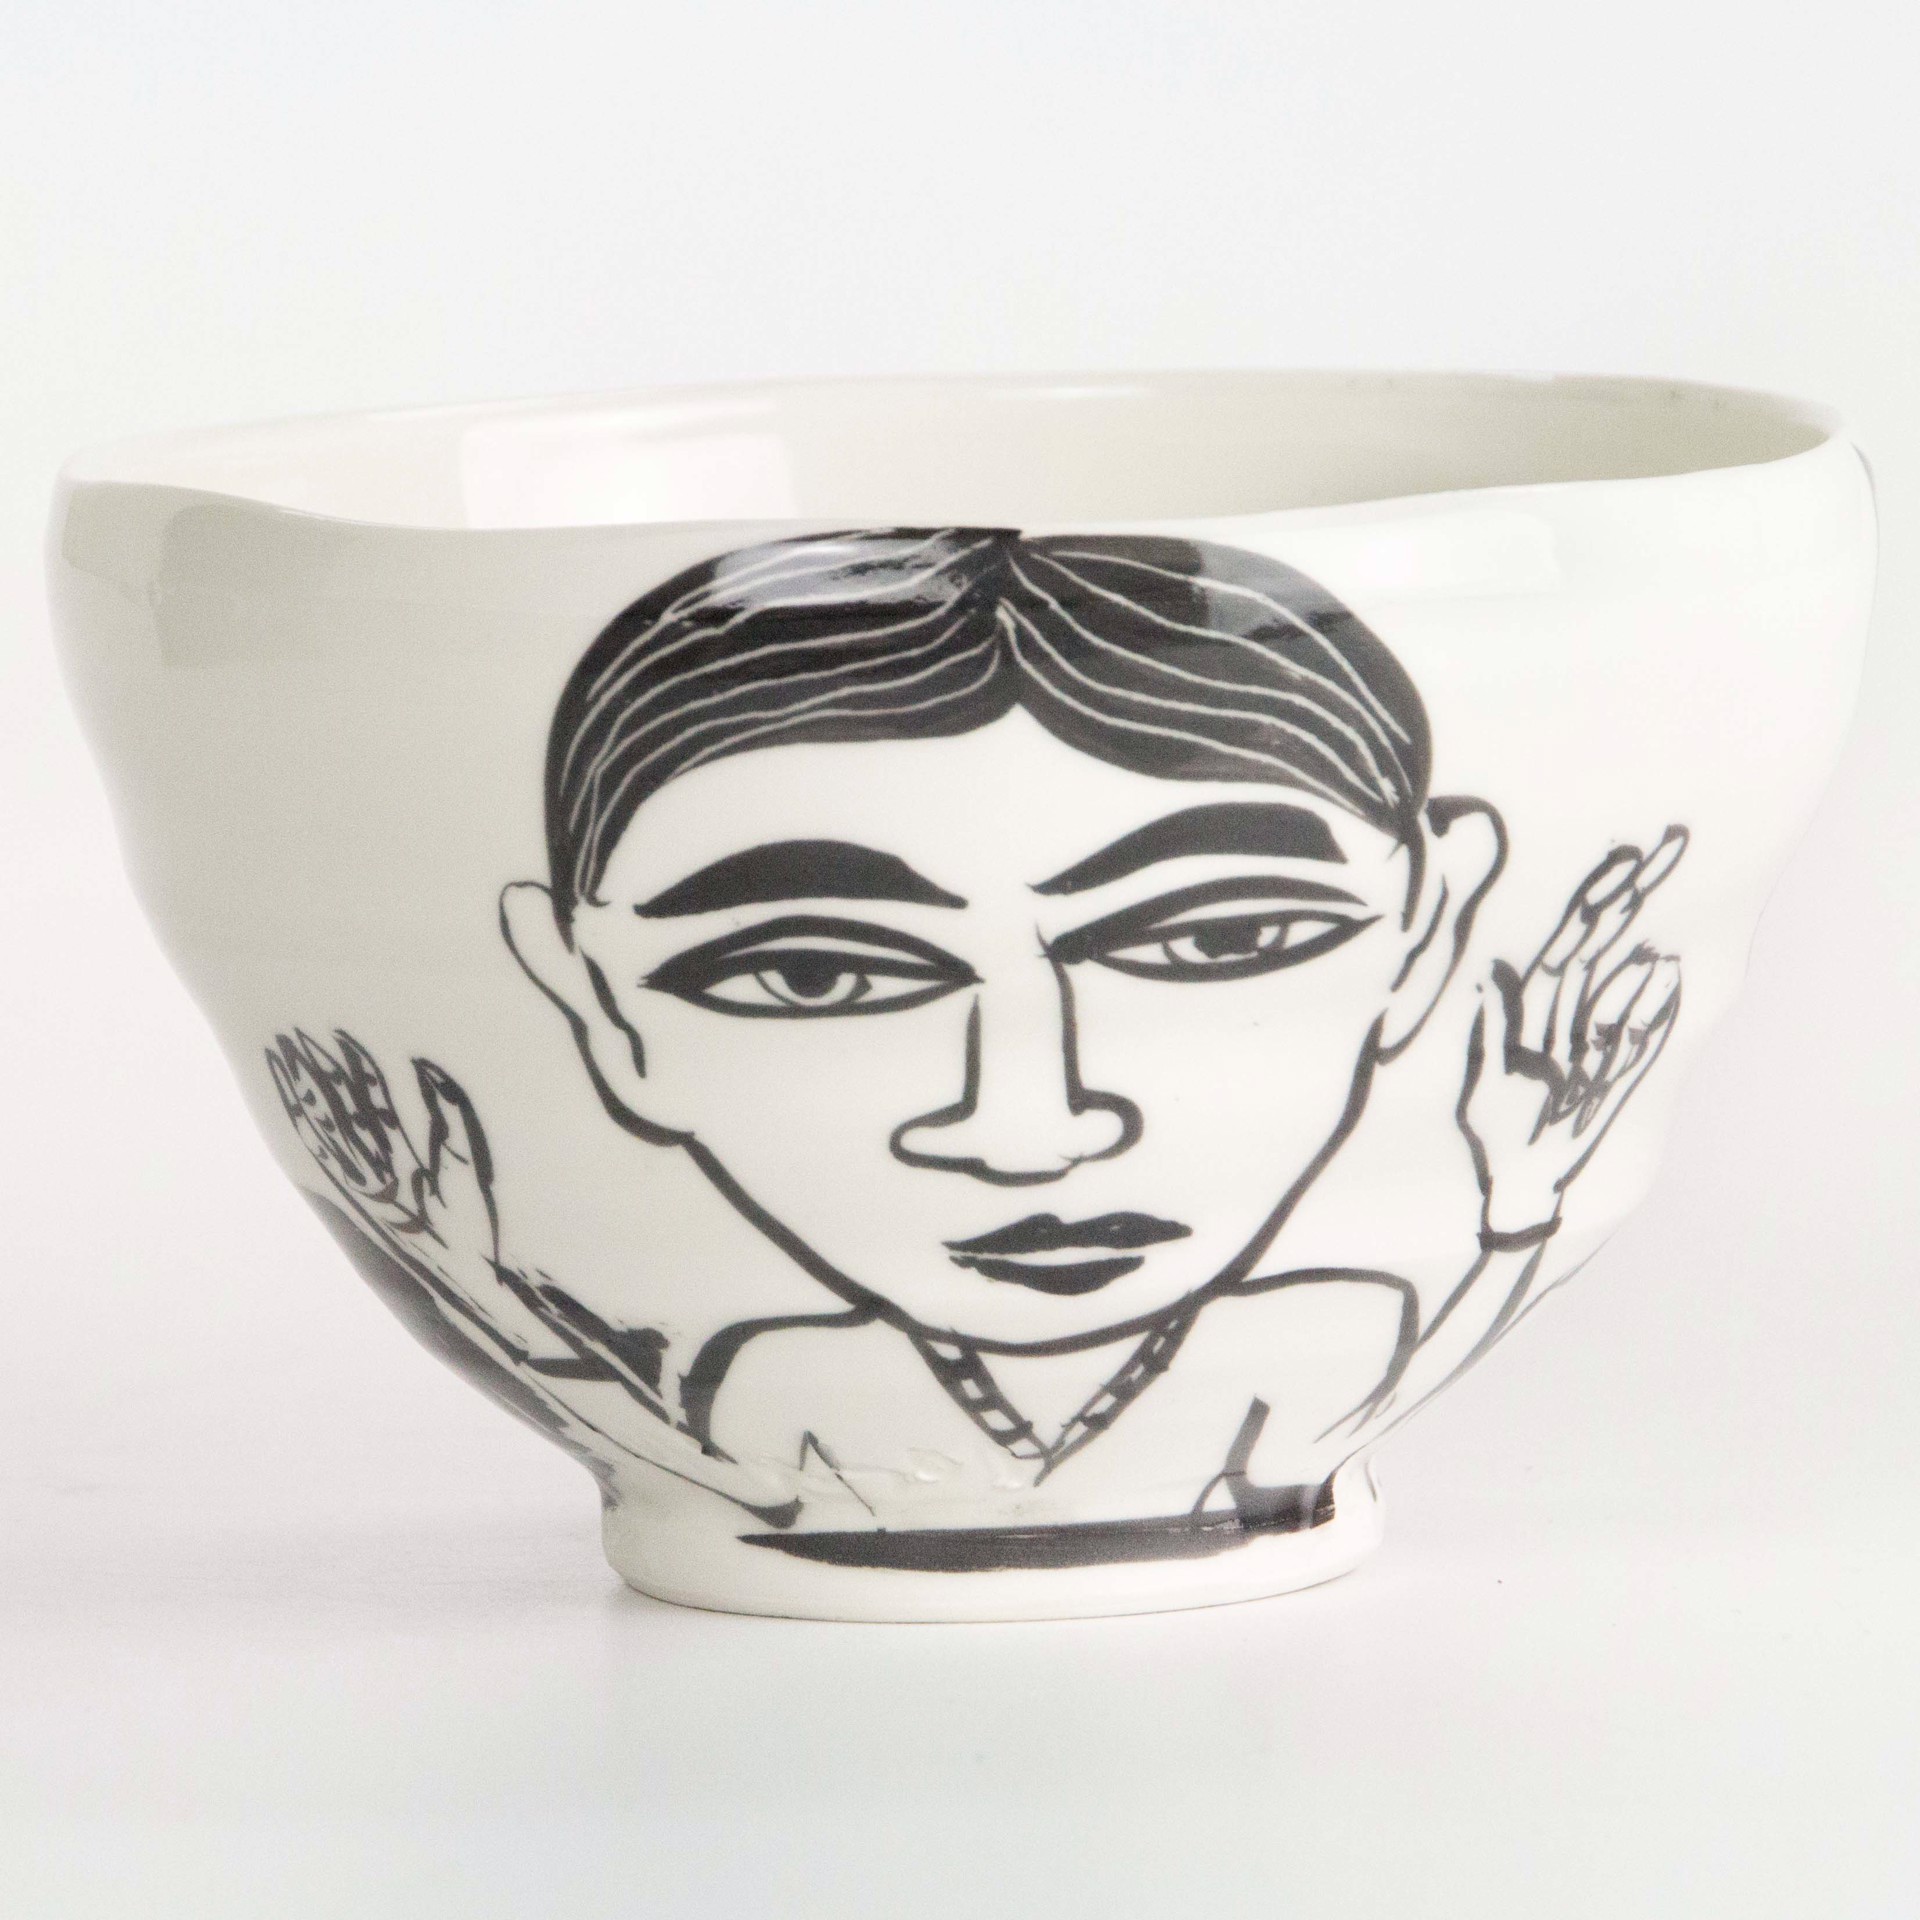 Bowl by Sunkoo Yuh